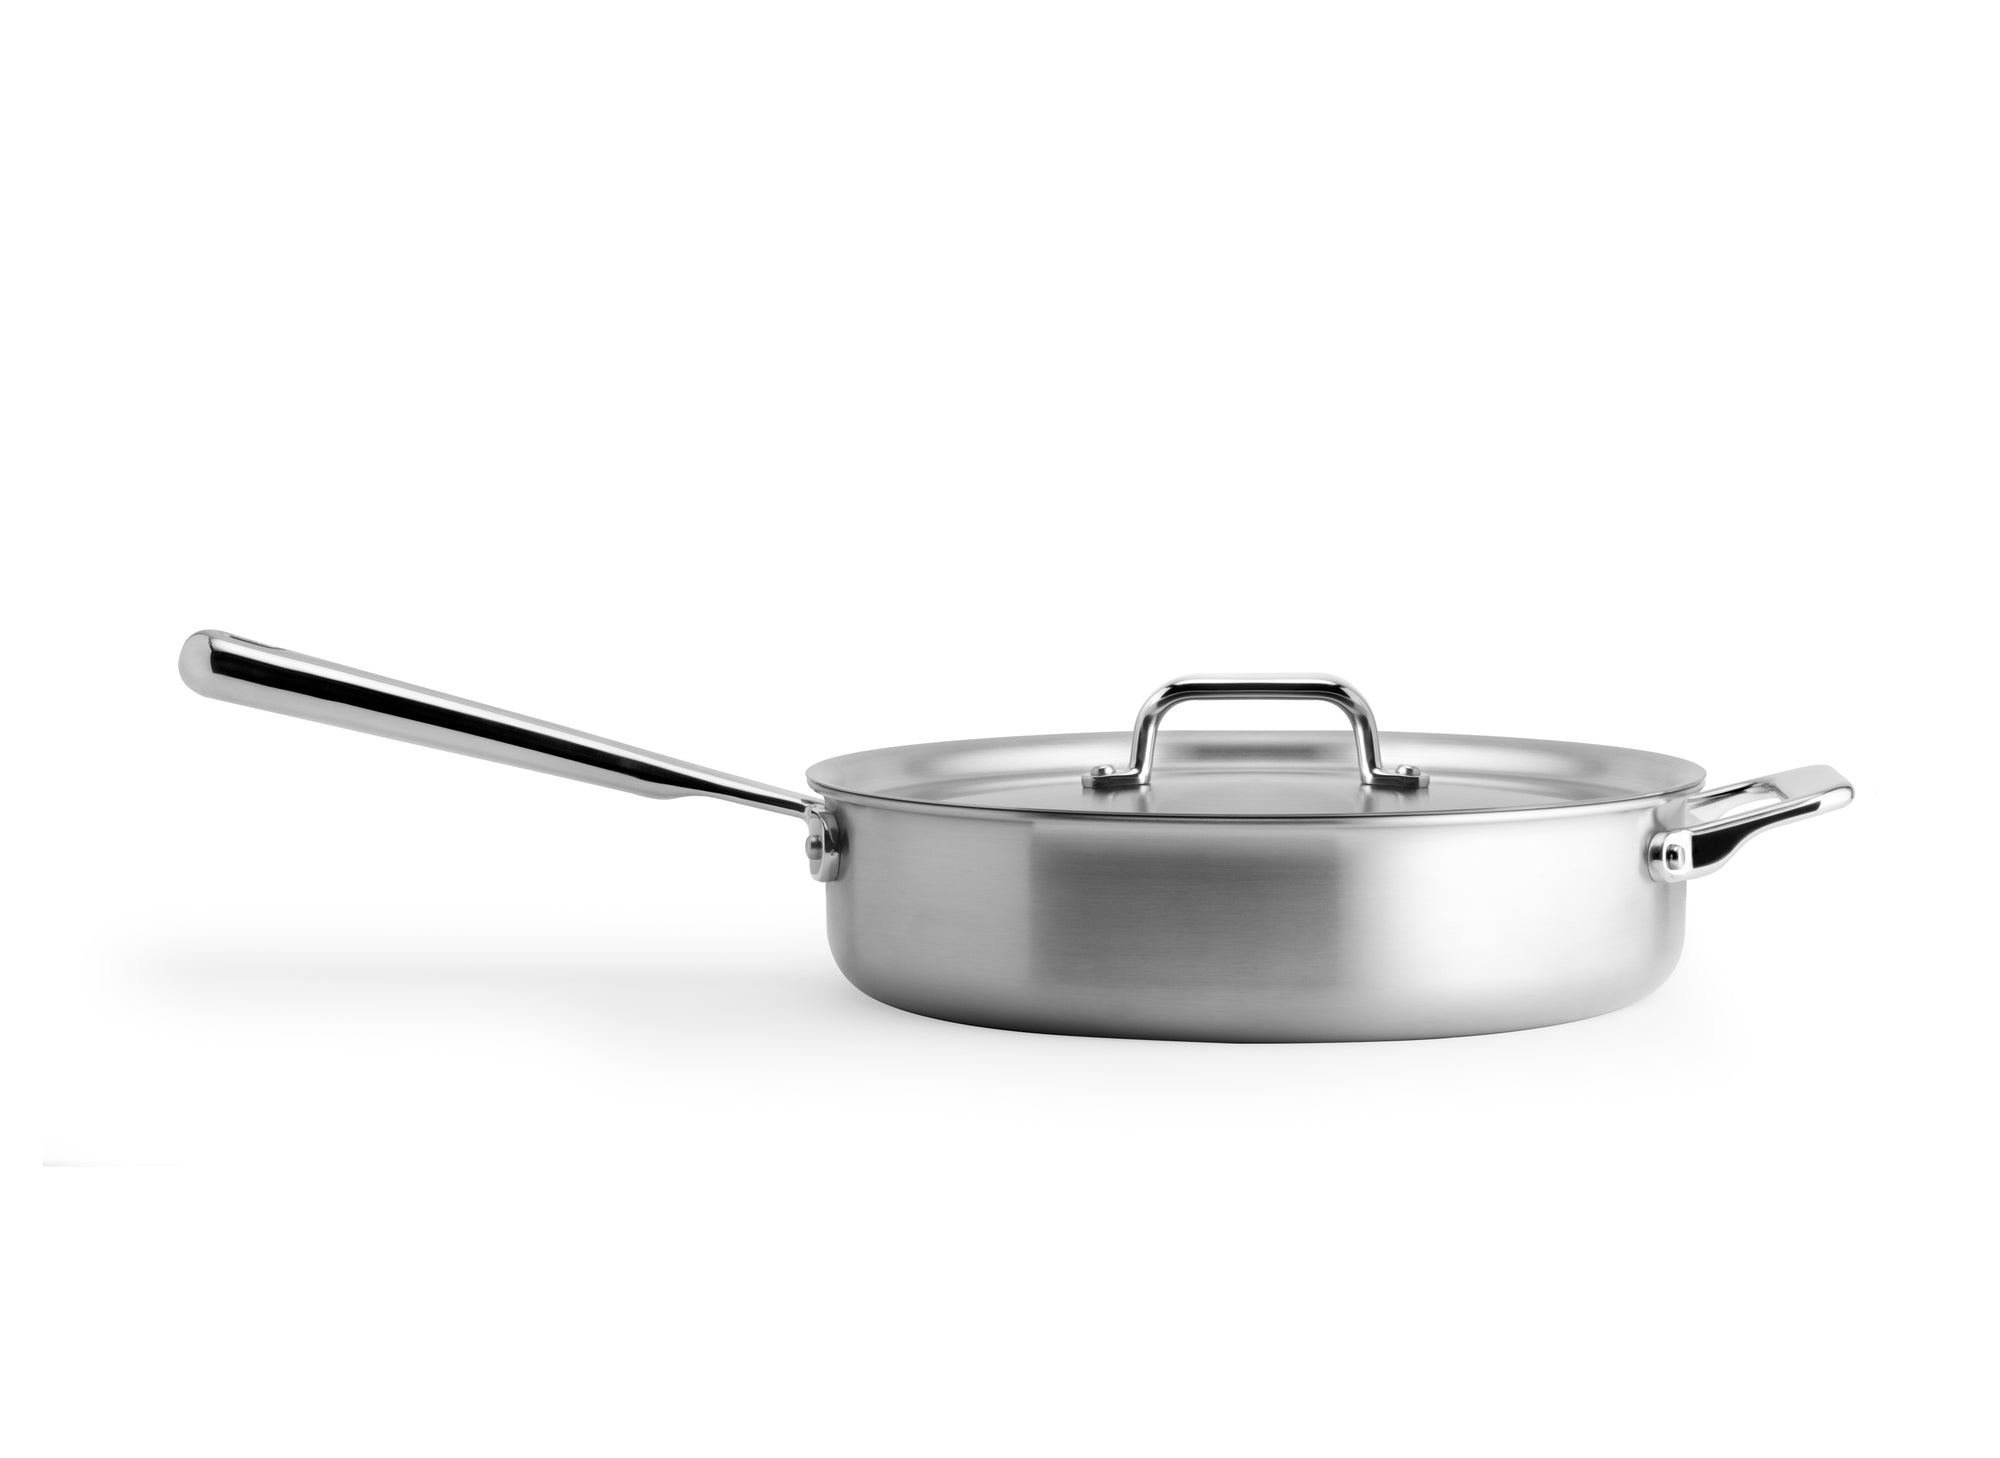 {{3-qt}} The Misen 3 QT Saute pan is the ideal combination of heat retention and fast, even heating for quicker boiling.